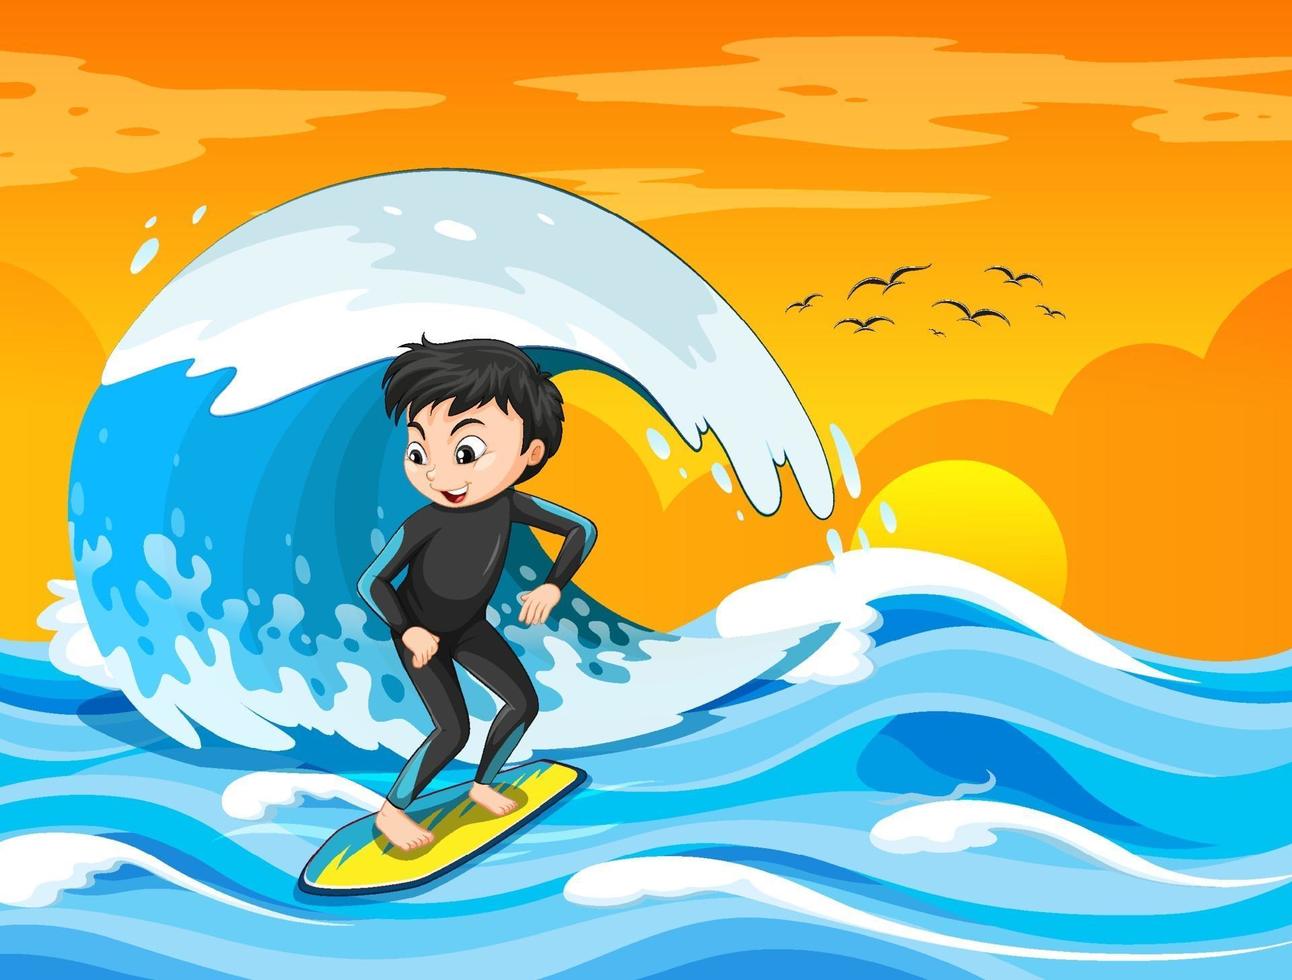 Big wave in the ocean scene with boy standing on a surf board vector